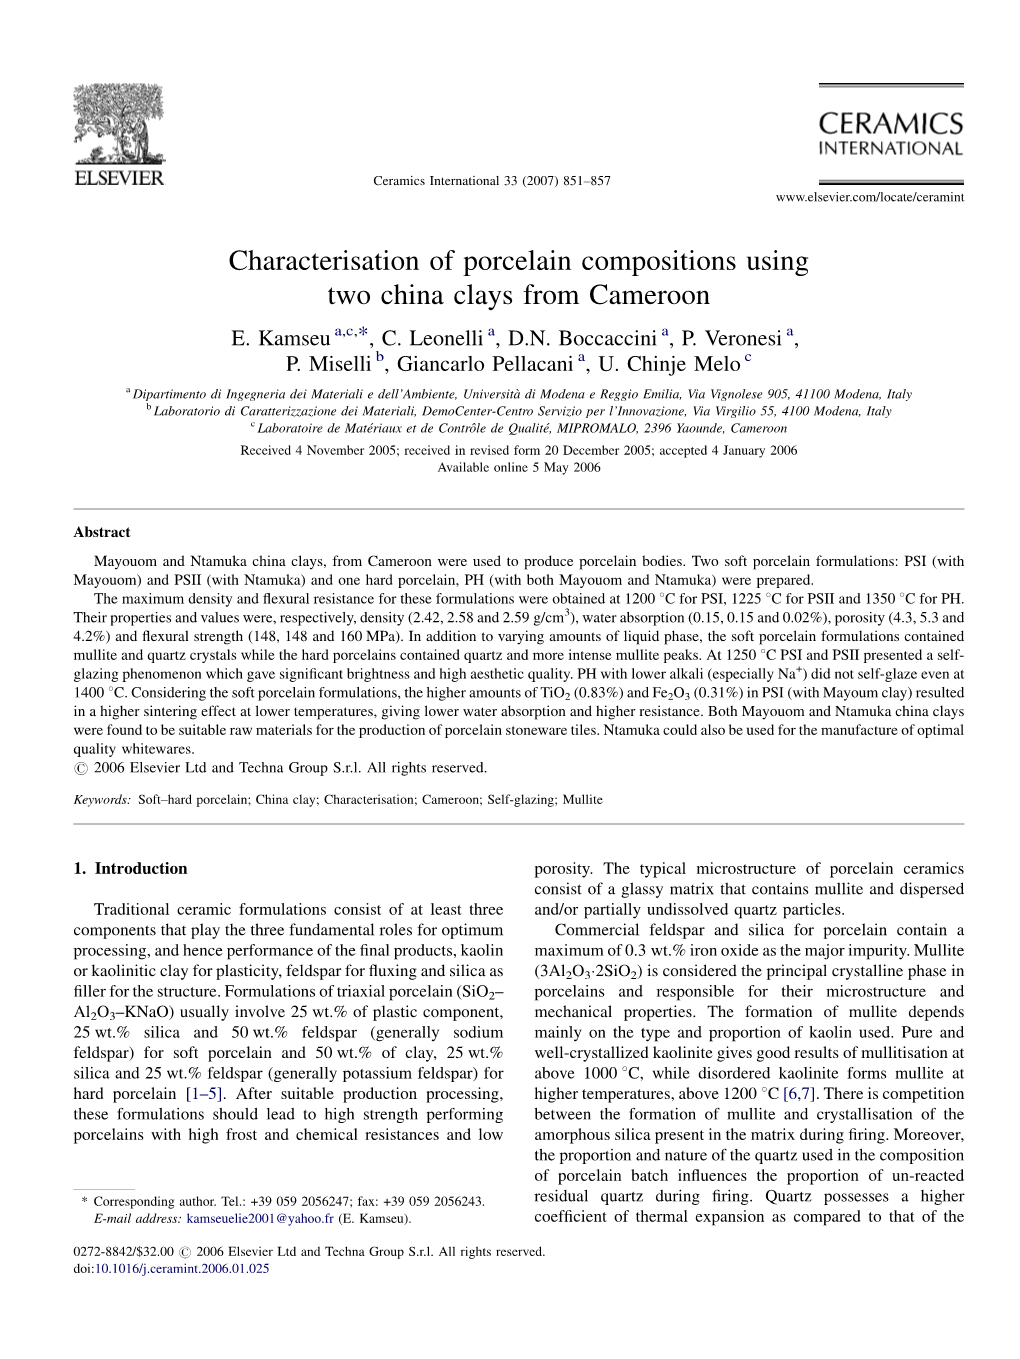 Characterisation of Porcelain Compositions Using Two China Clays from Cameroon E